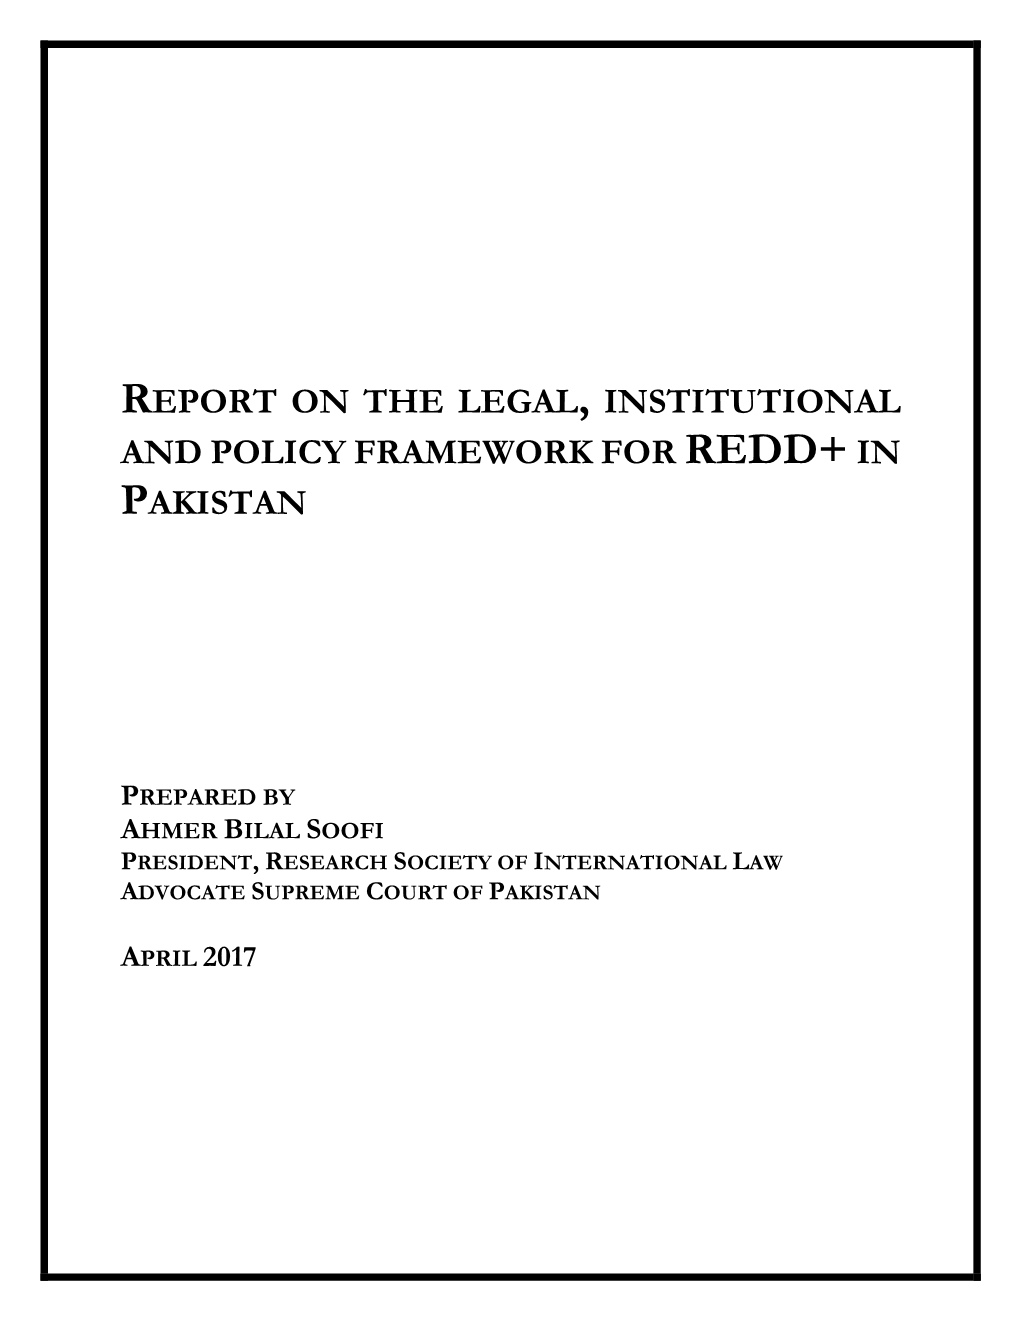 Report on the Legal, Institutional and Policy Framework for Redd+ in Pakistan